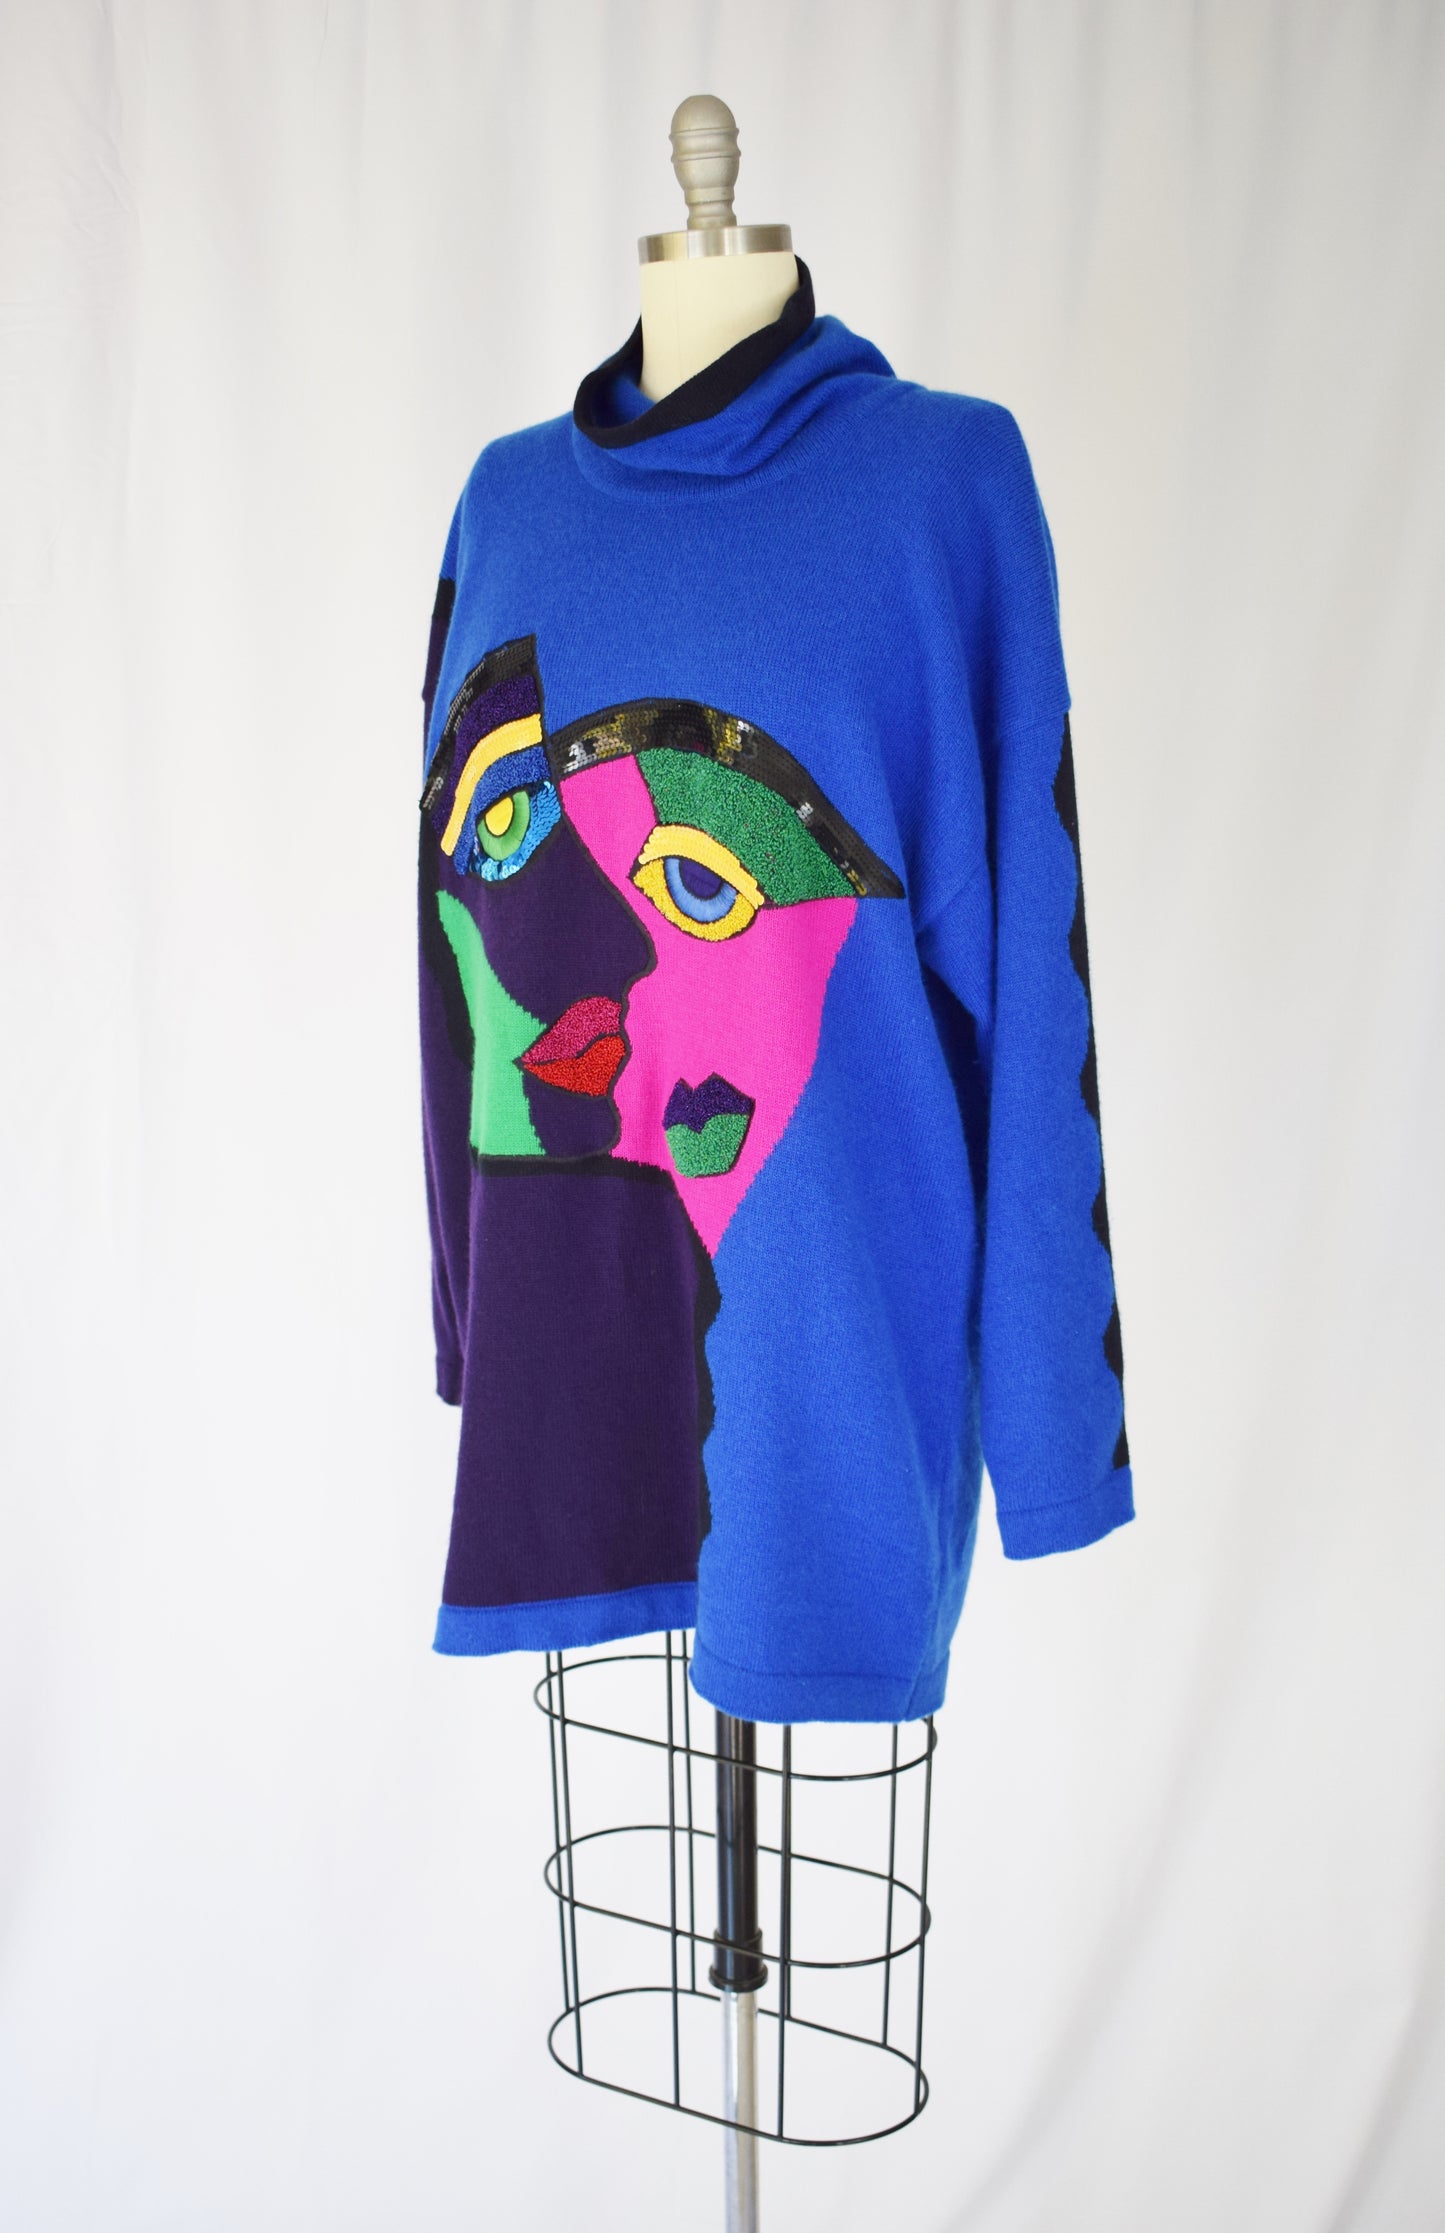 Vintage Abstract Face Wool Sweater by Margaretha Ley for Escada | M/L